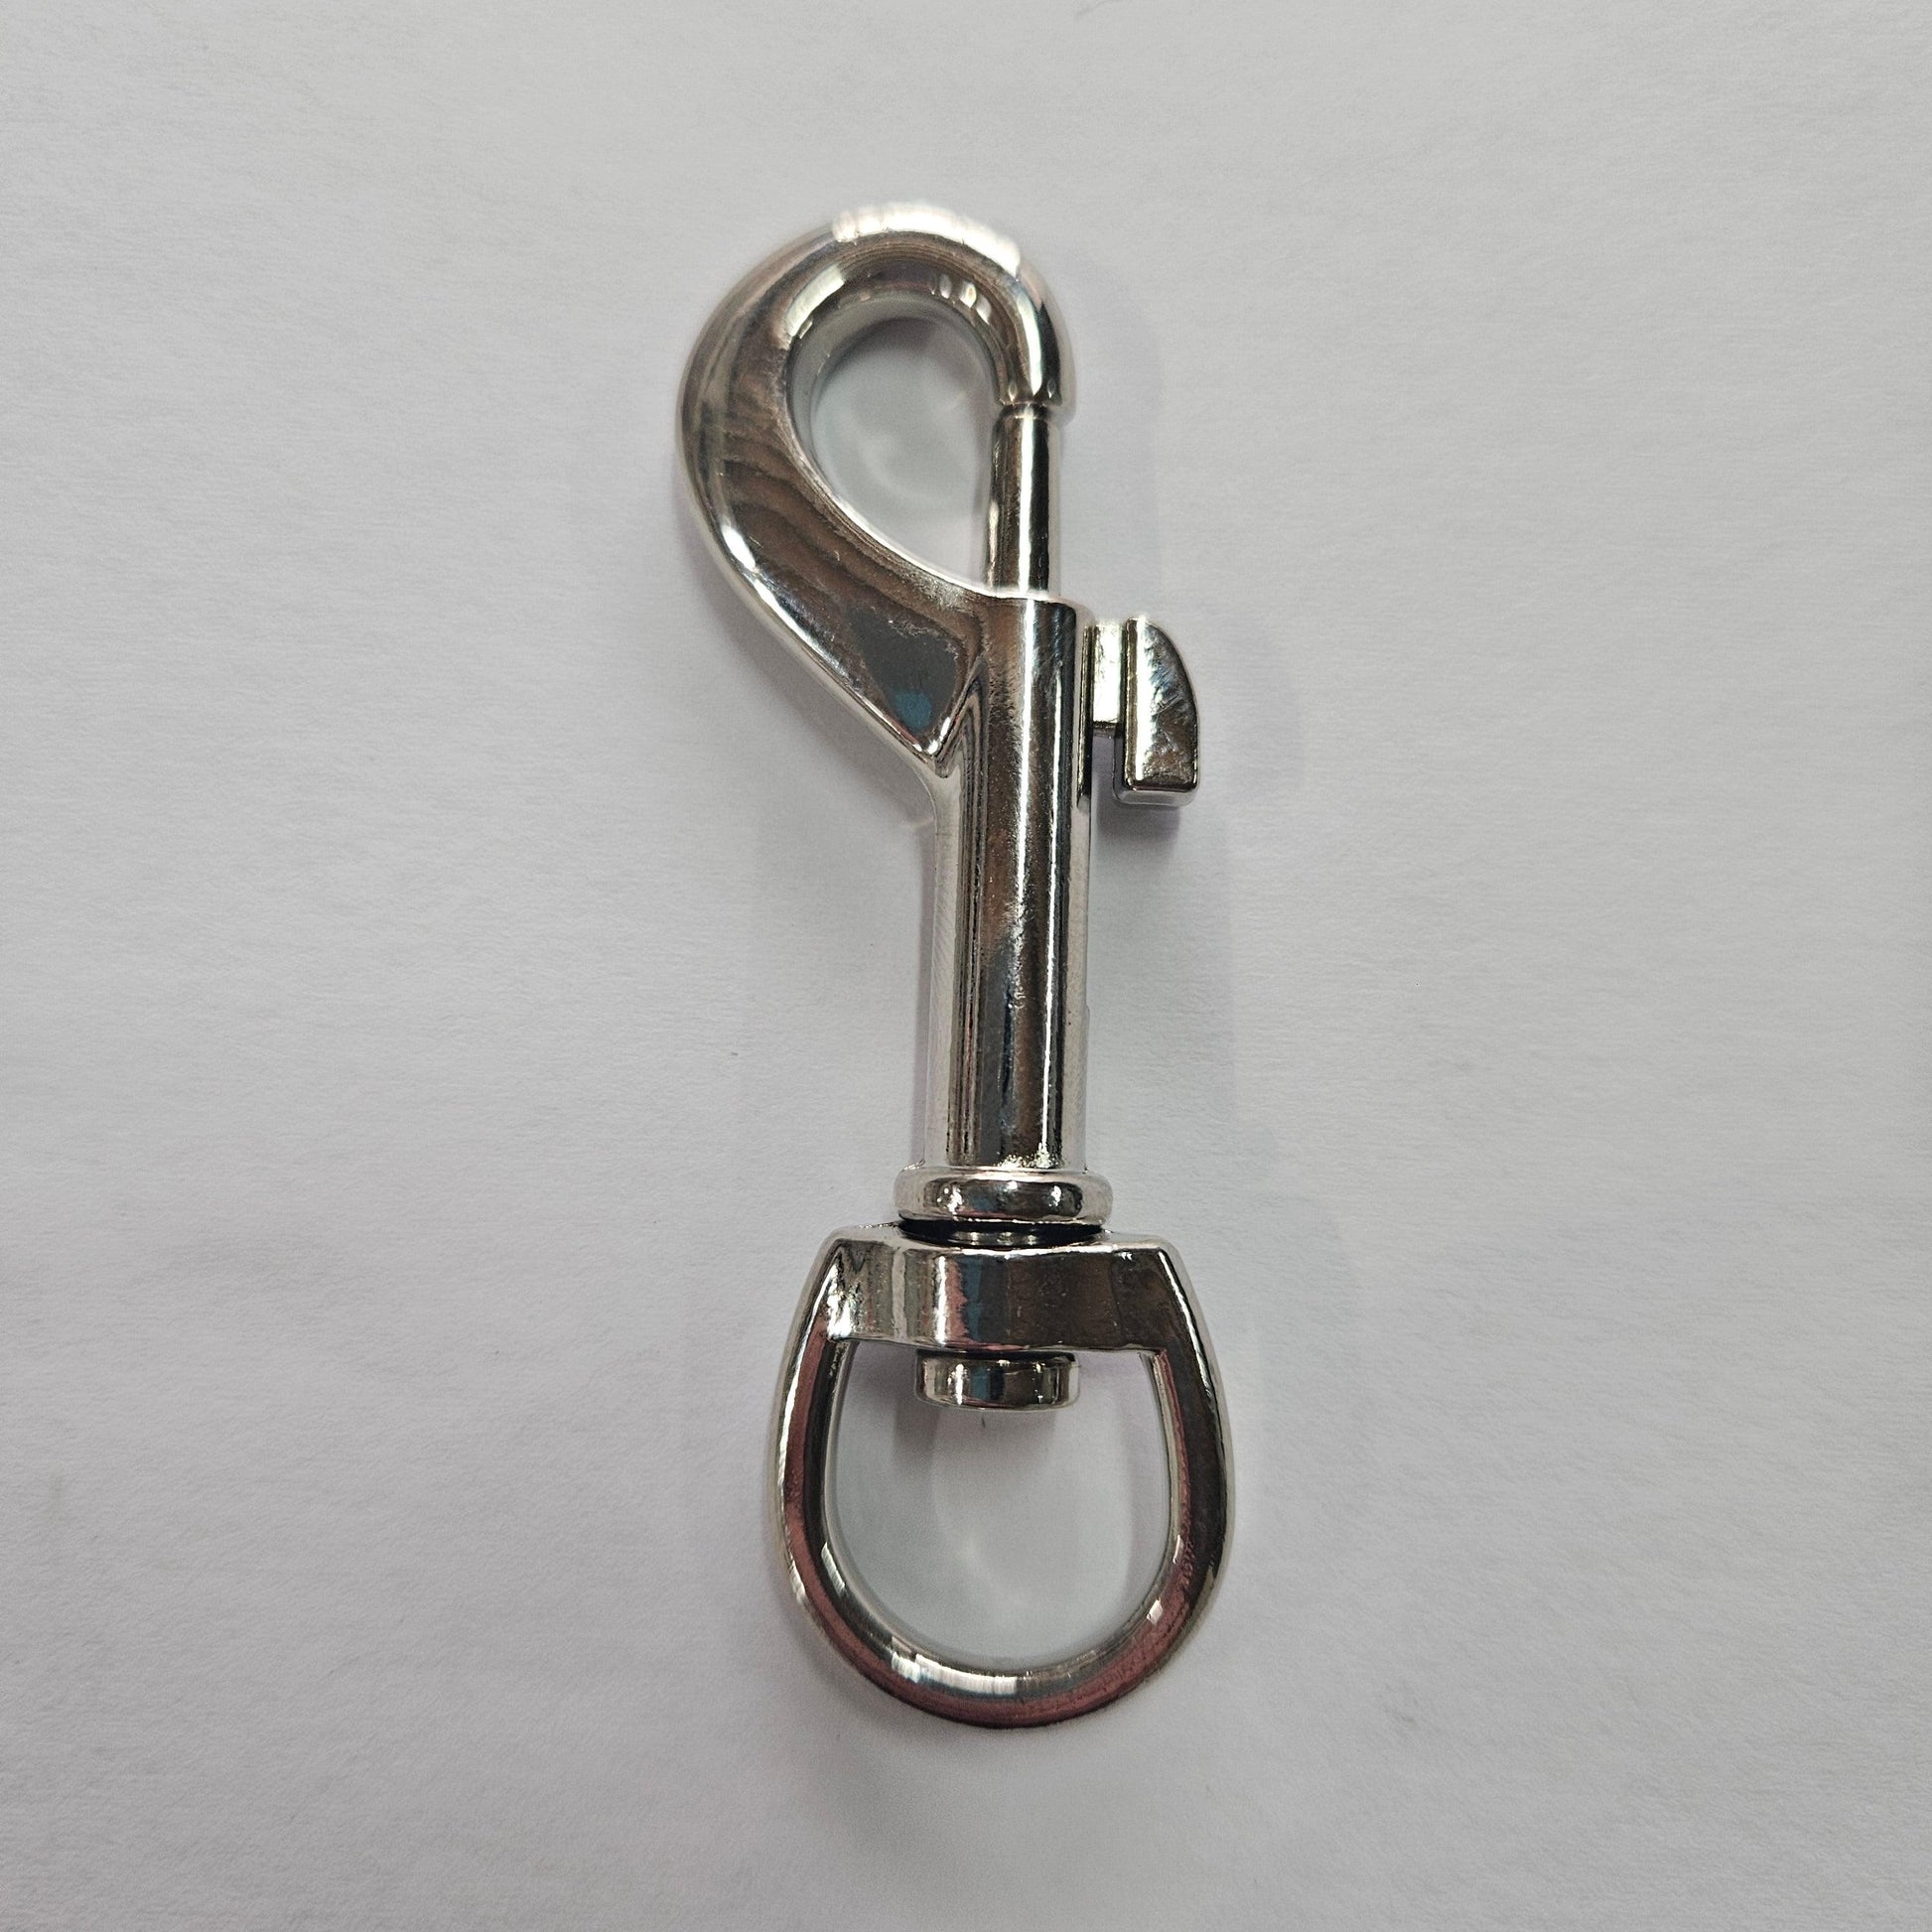 Snap Hooks - 1/2 inch 12mm - Cams Cords